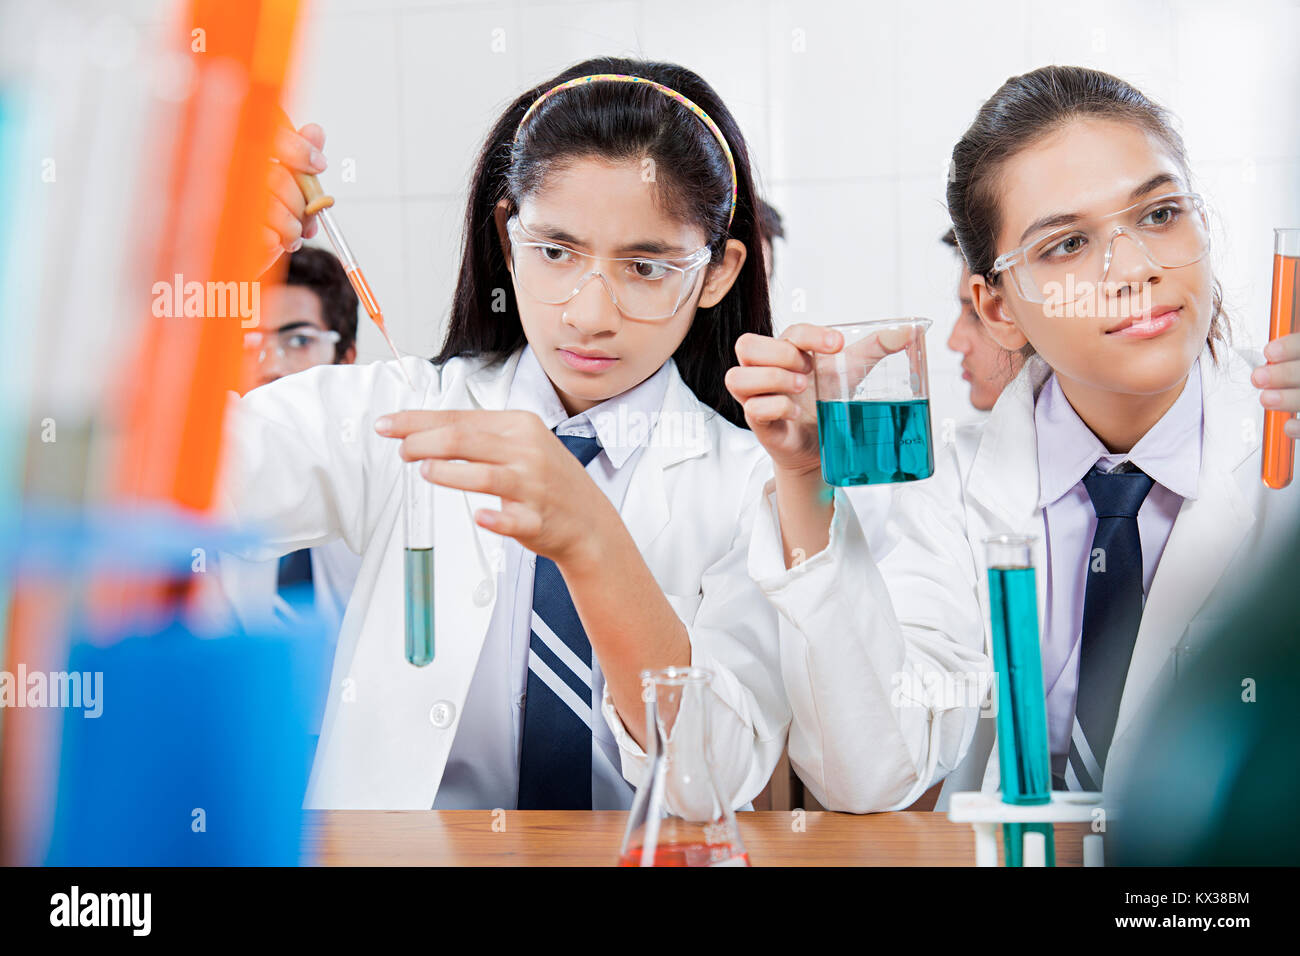 Indian High School Girls Students Doing Chemical Experiment Research laboratory Stock Photo